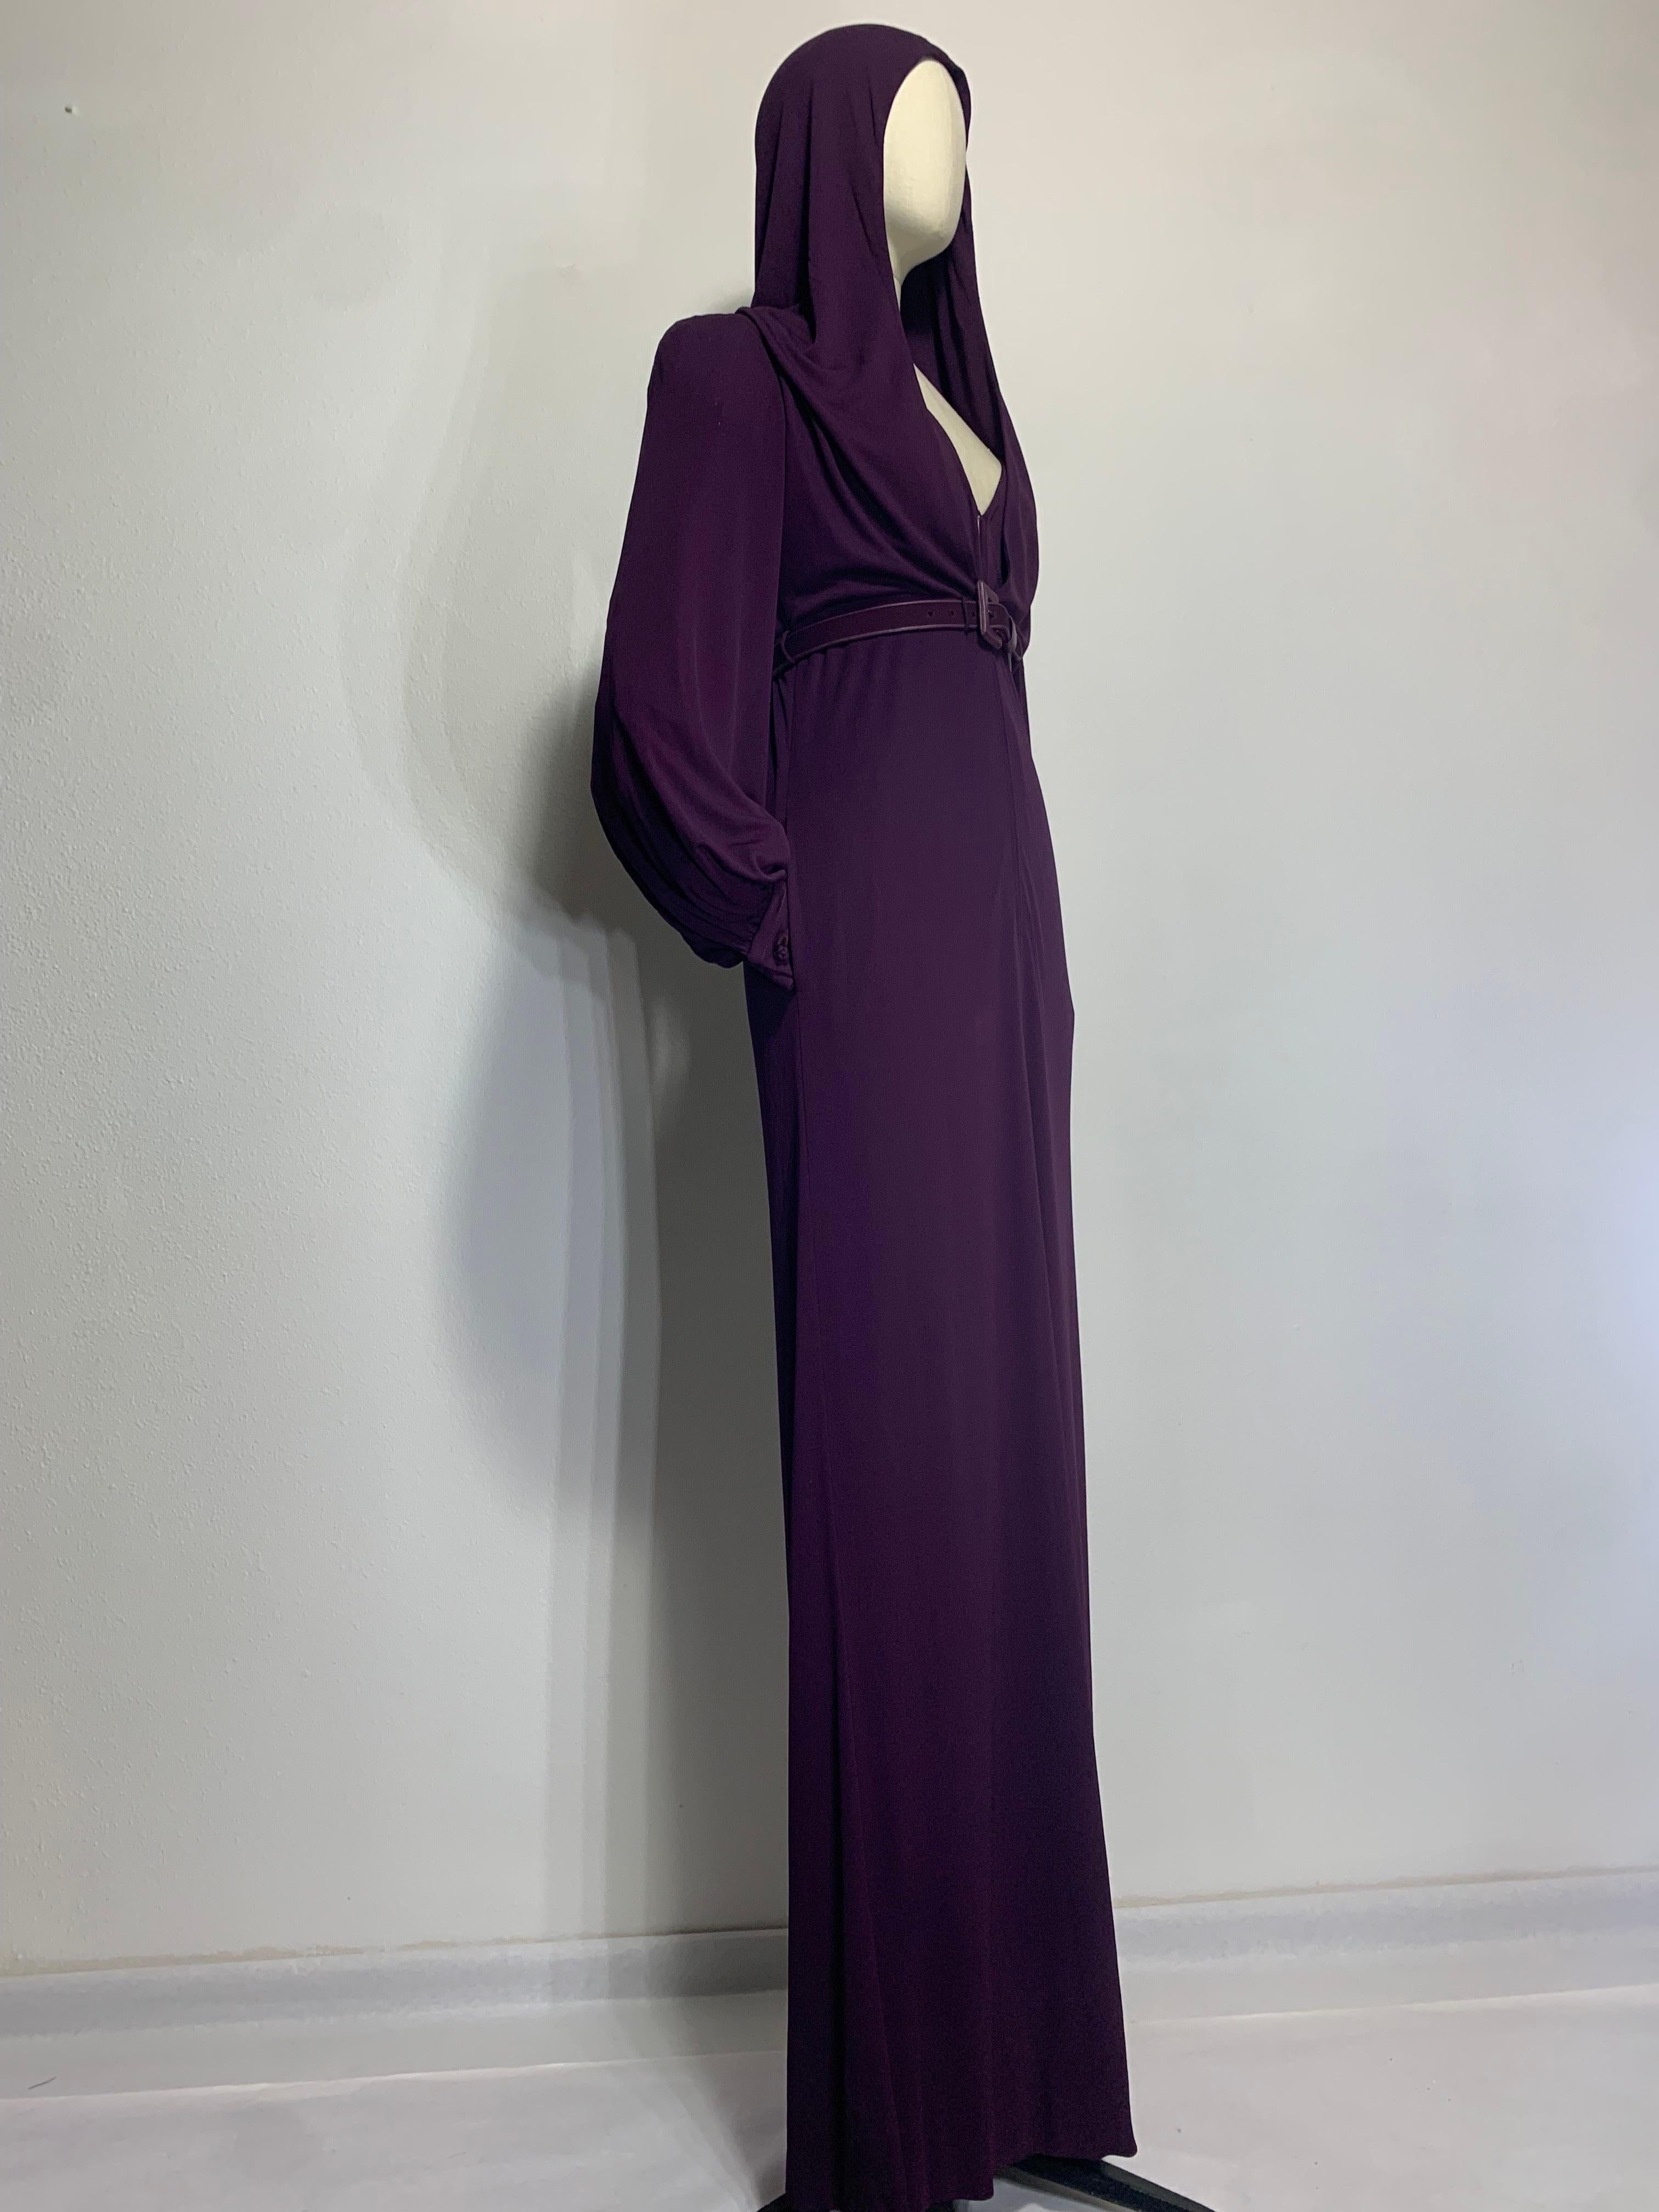 1975 James Galanos Dramatic Aubergine Jersey Maxi Gown w Fabulous Draped Hood For Sale 9